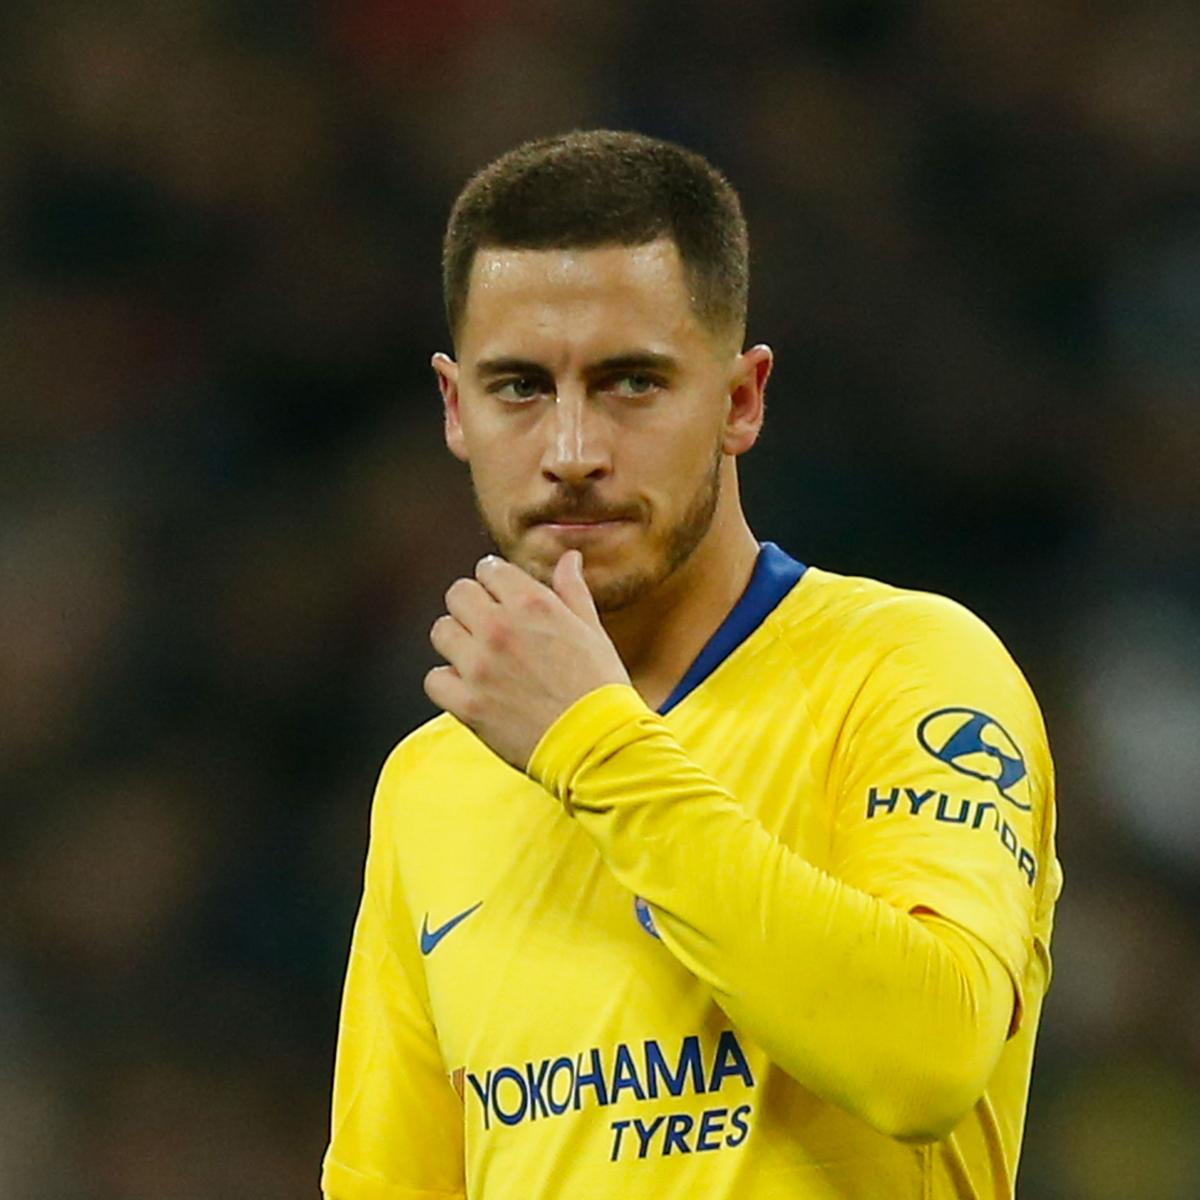 Chelsea Transfer News: Eden Hazard Says 2019 Exit Possible, Rules Out PSG Move ...